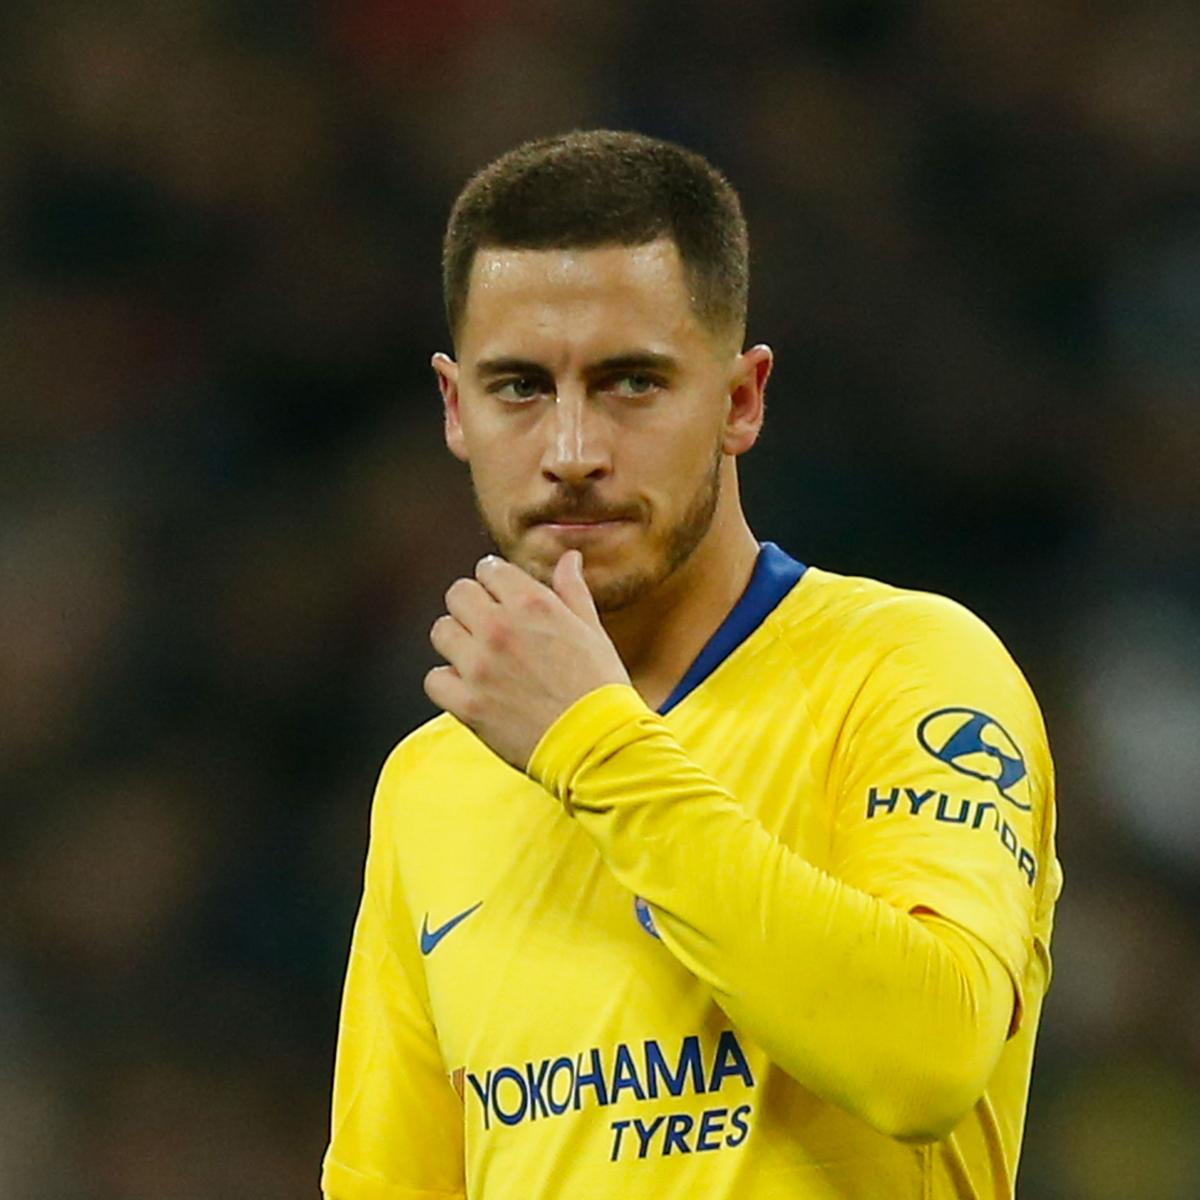 Chelsea Transfer News: Eden Hazard Says 2019 Exit Possible, Rules Out PSG Move ...